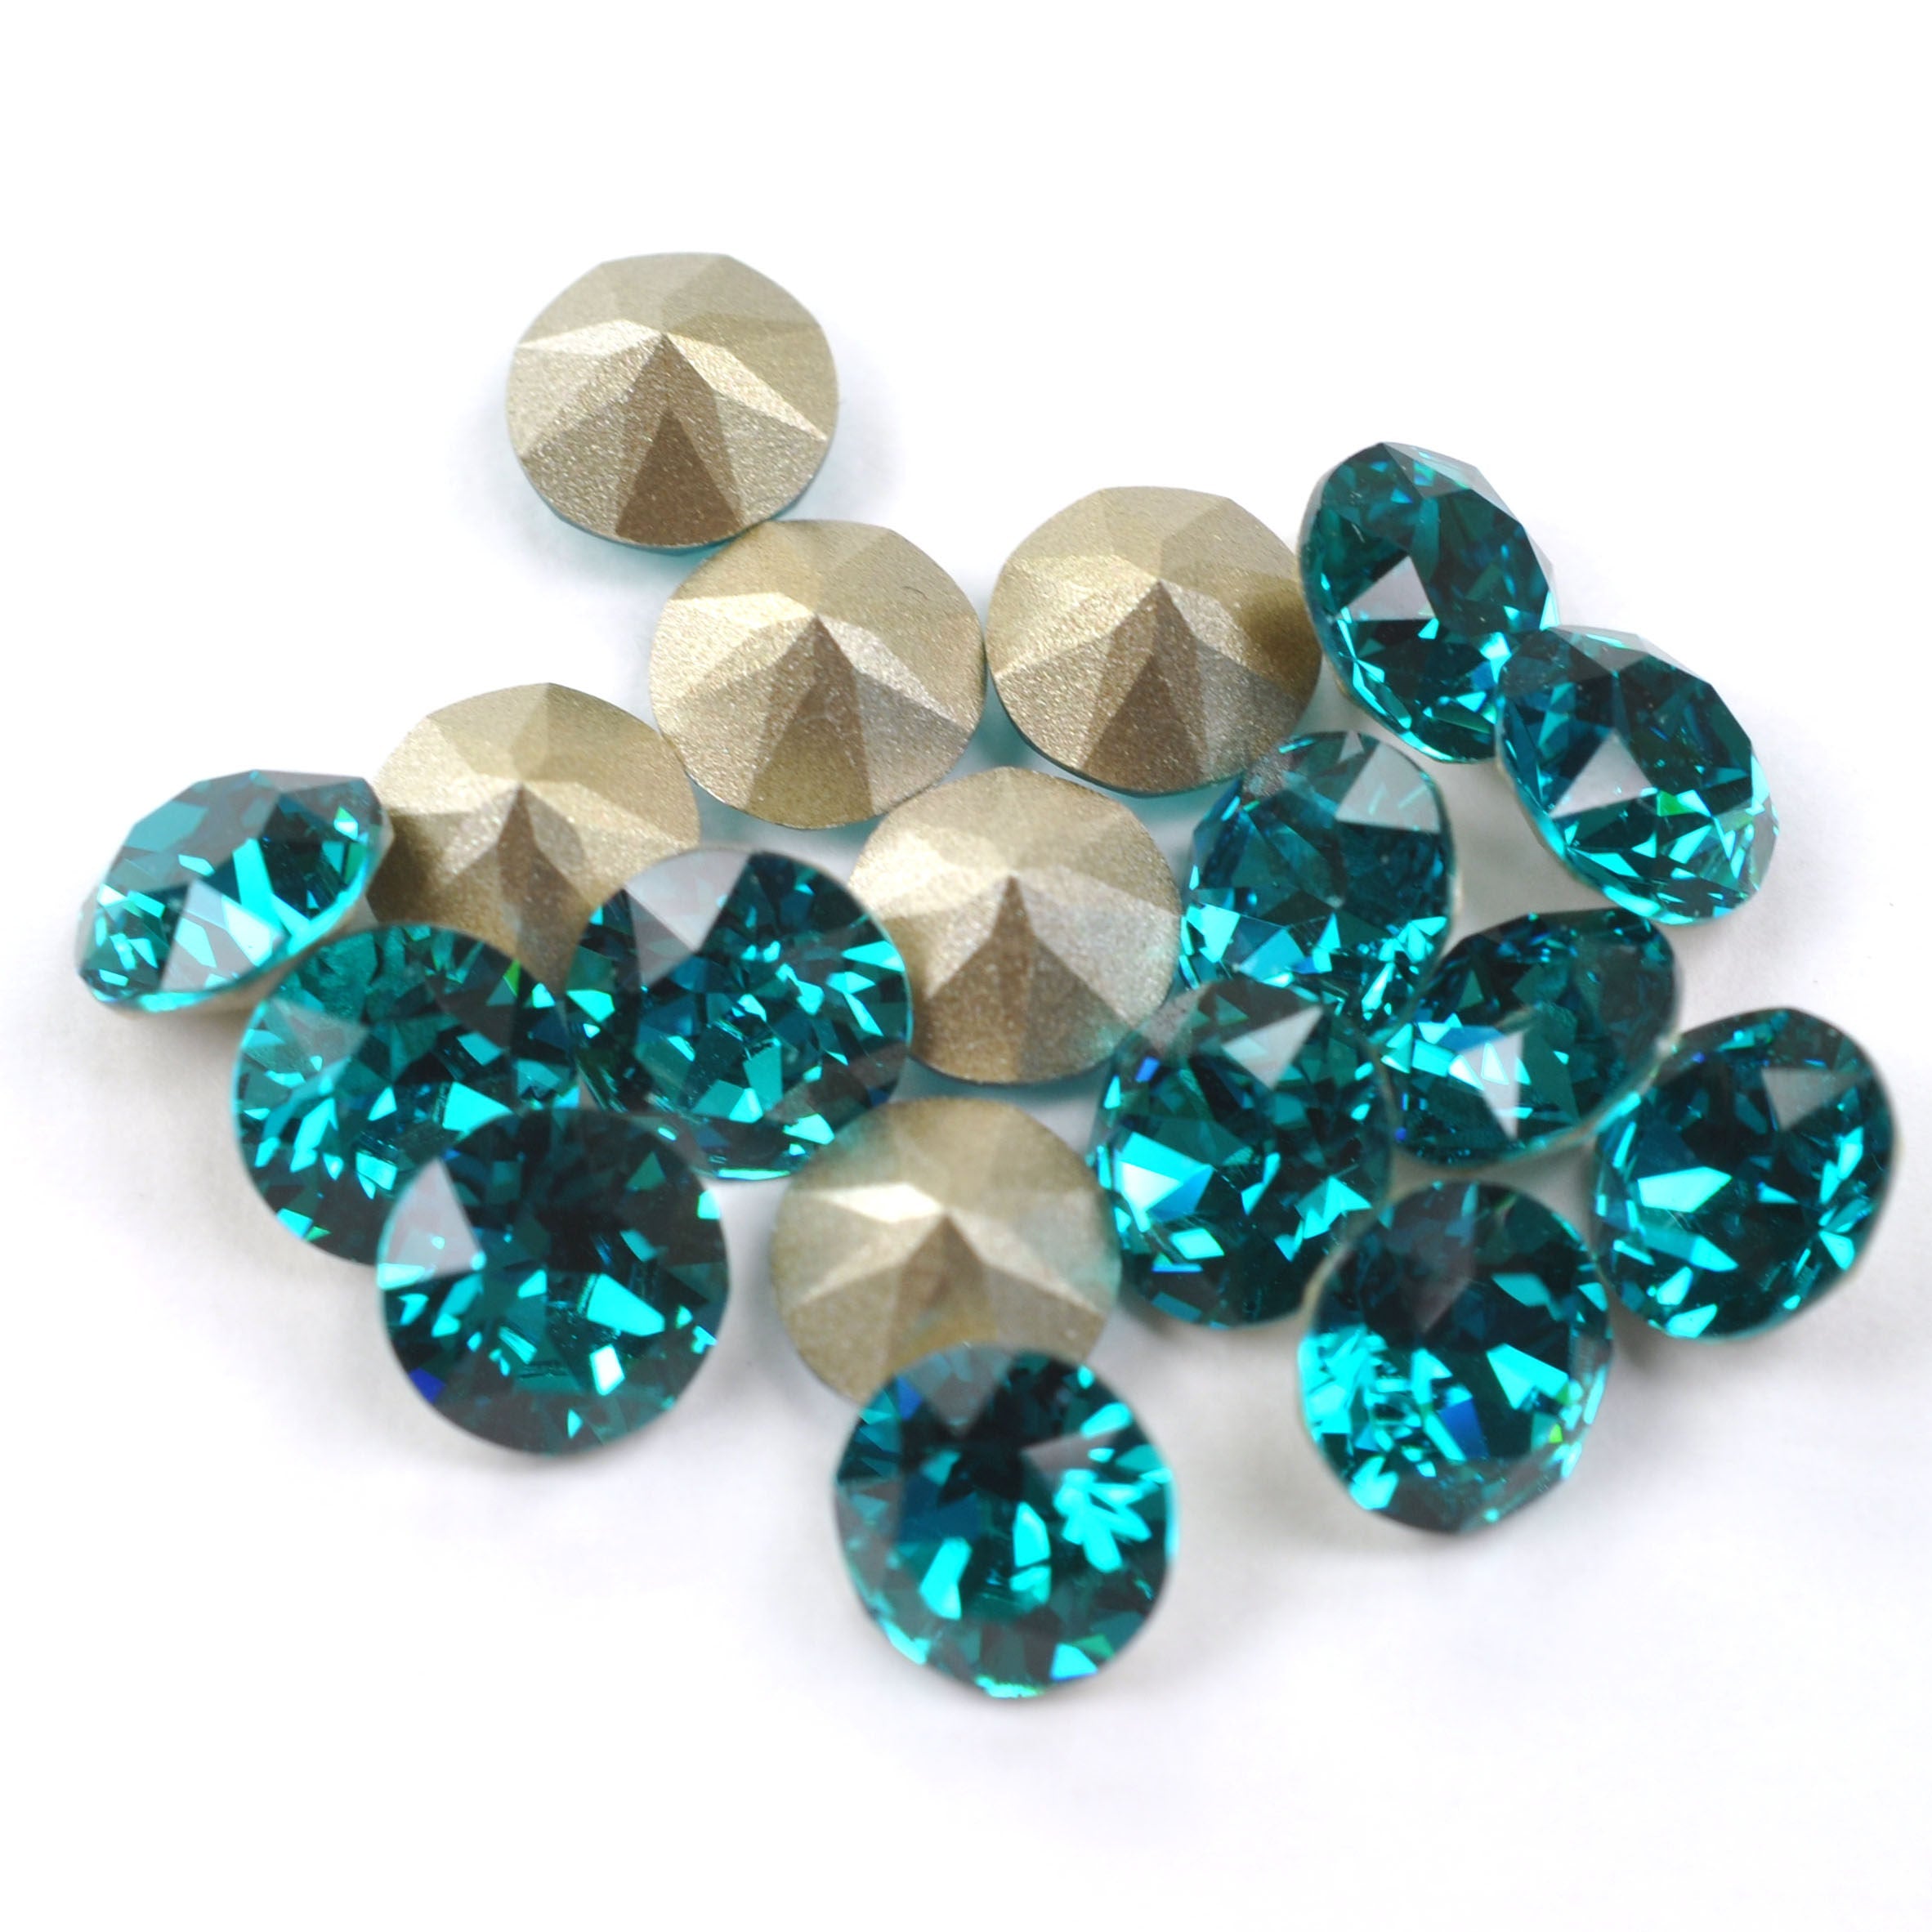 Blue Zircon 1088 Pointed Back Chaton Barton Crystal 39ss, 8mm